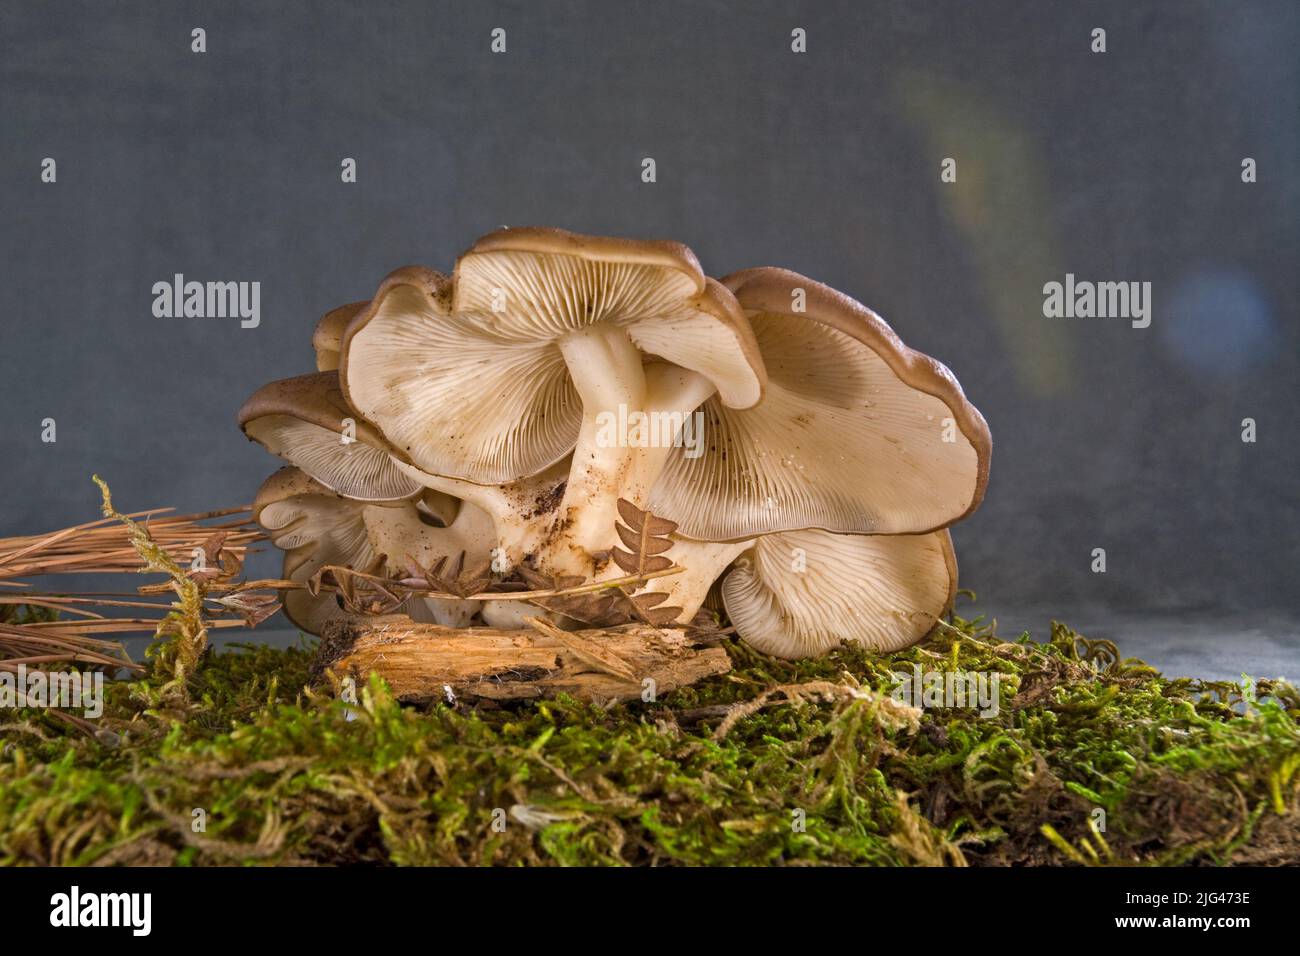 Lyophyllum decastes mushrooms, commonly known as Fried Chicken Mushrooms, growing on a roadside in the central Oregon Cascades near Camp Sherman, Oregon. Stock Photo